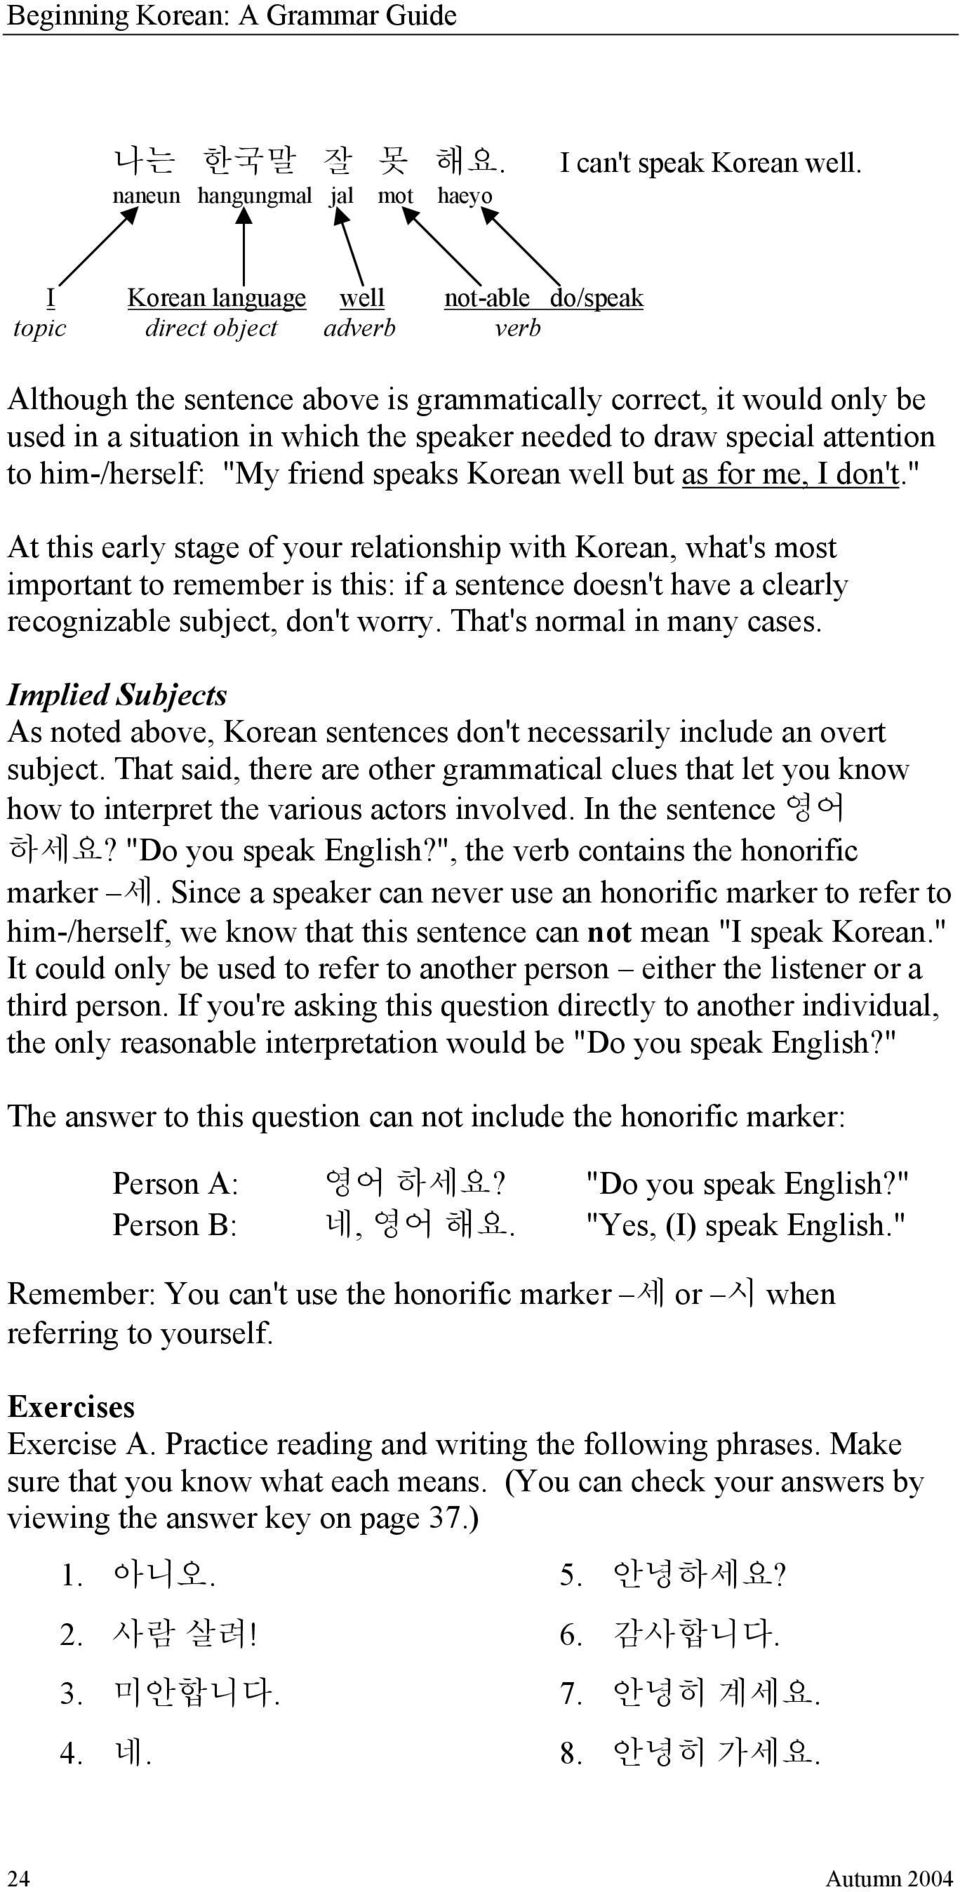 special attention to him-/herself: "My friend speaks Korean well but as for me, I don't.